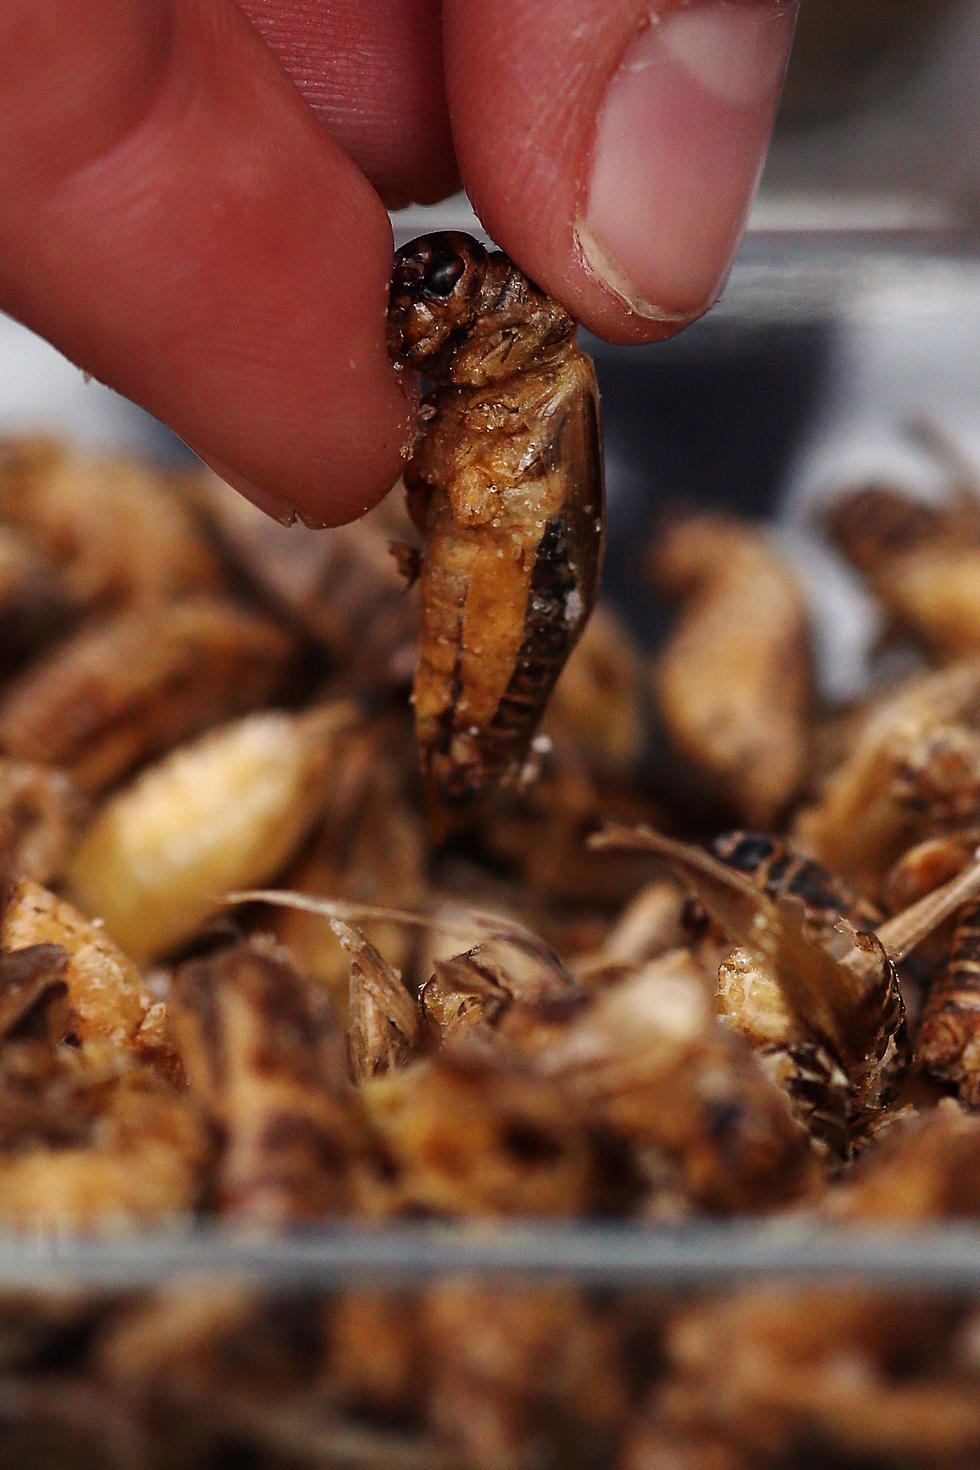 Seattle Baseball Fans Can Now Enjoy Fried Oysters, Bugs